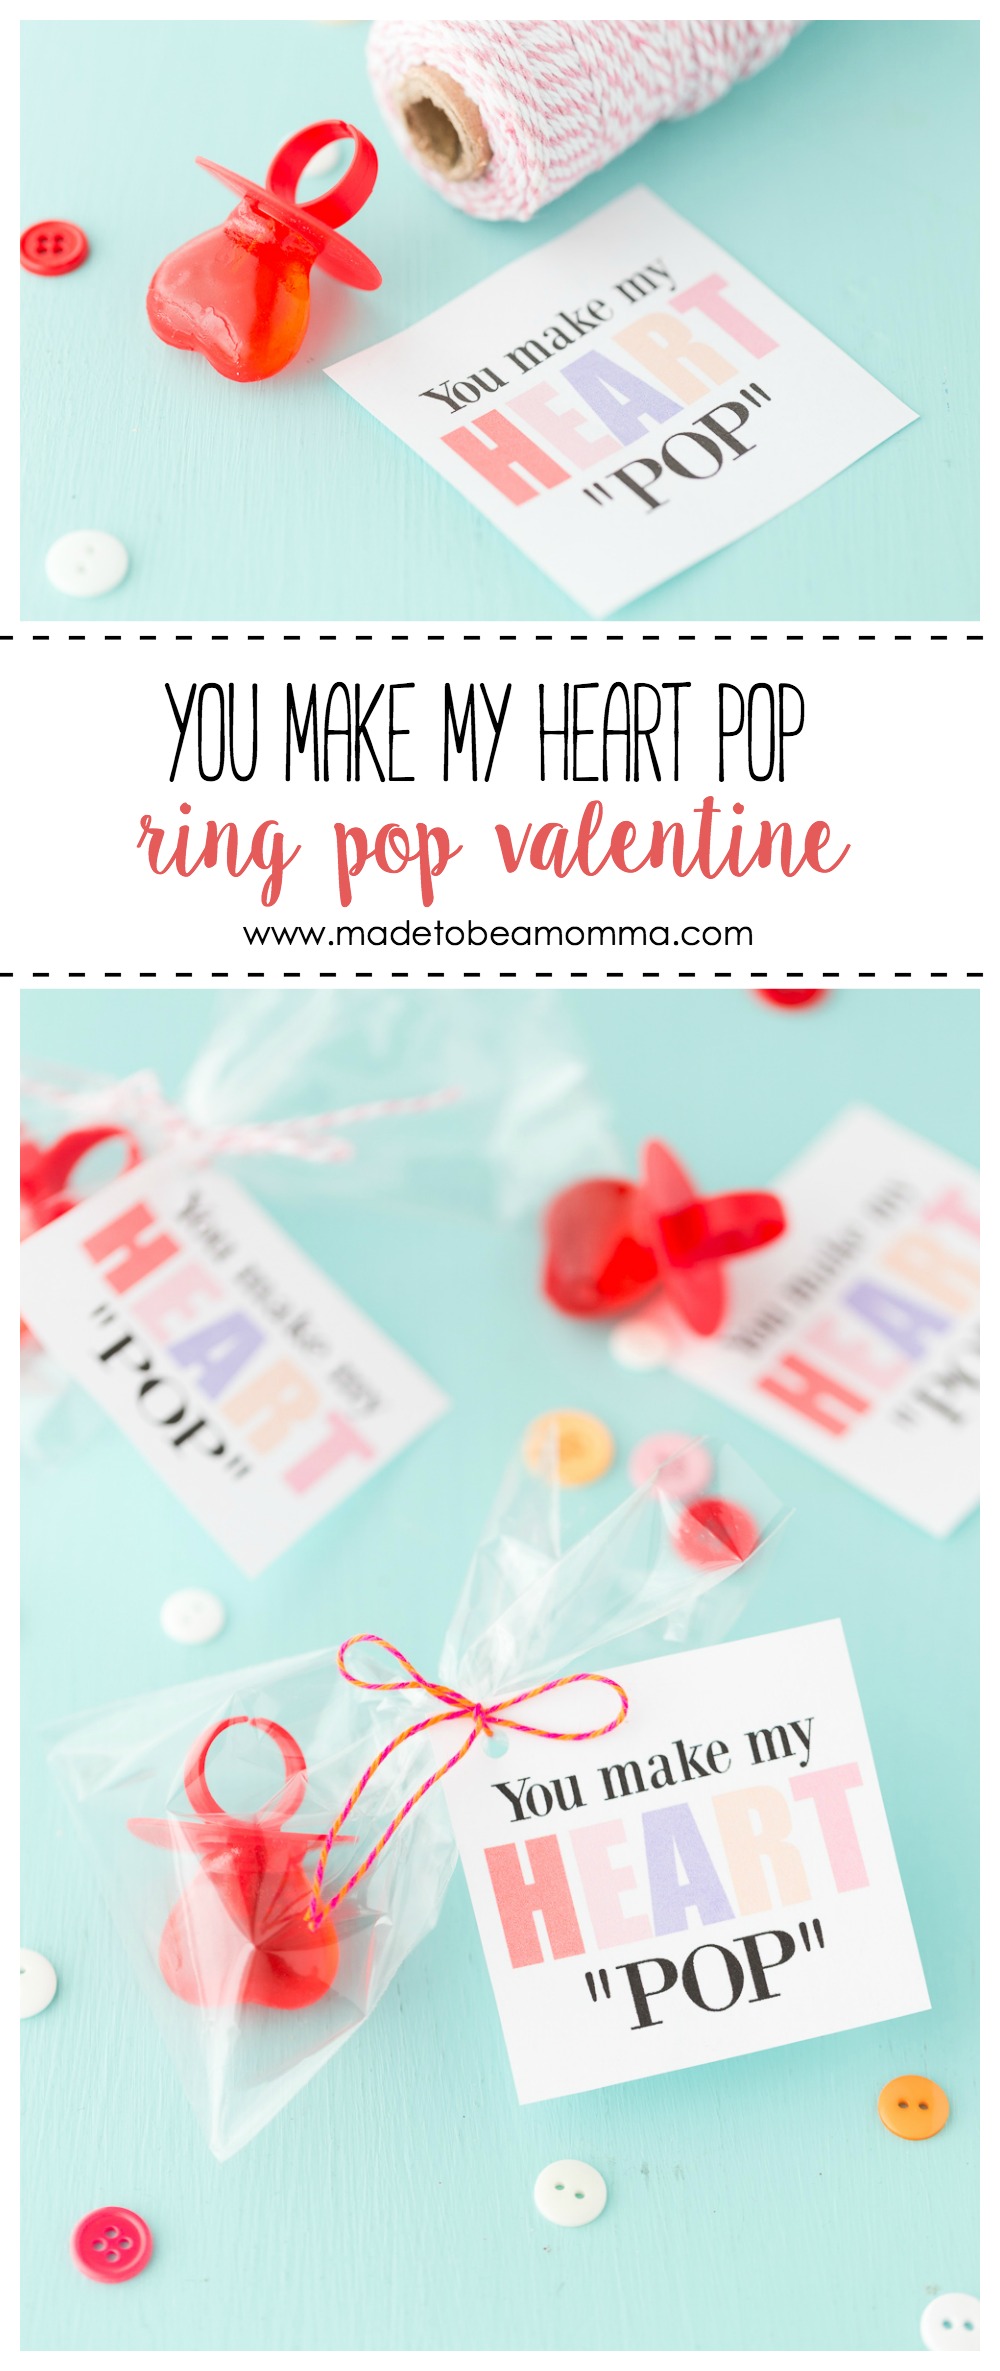 ring-pop-valentine-made-to-be-a-momma